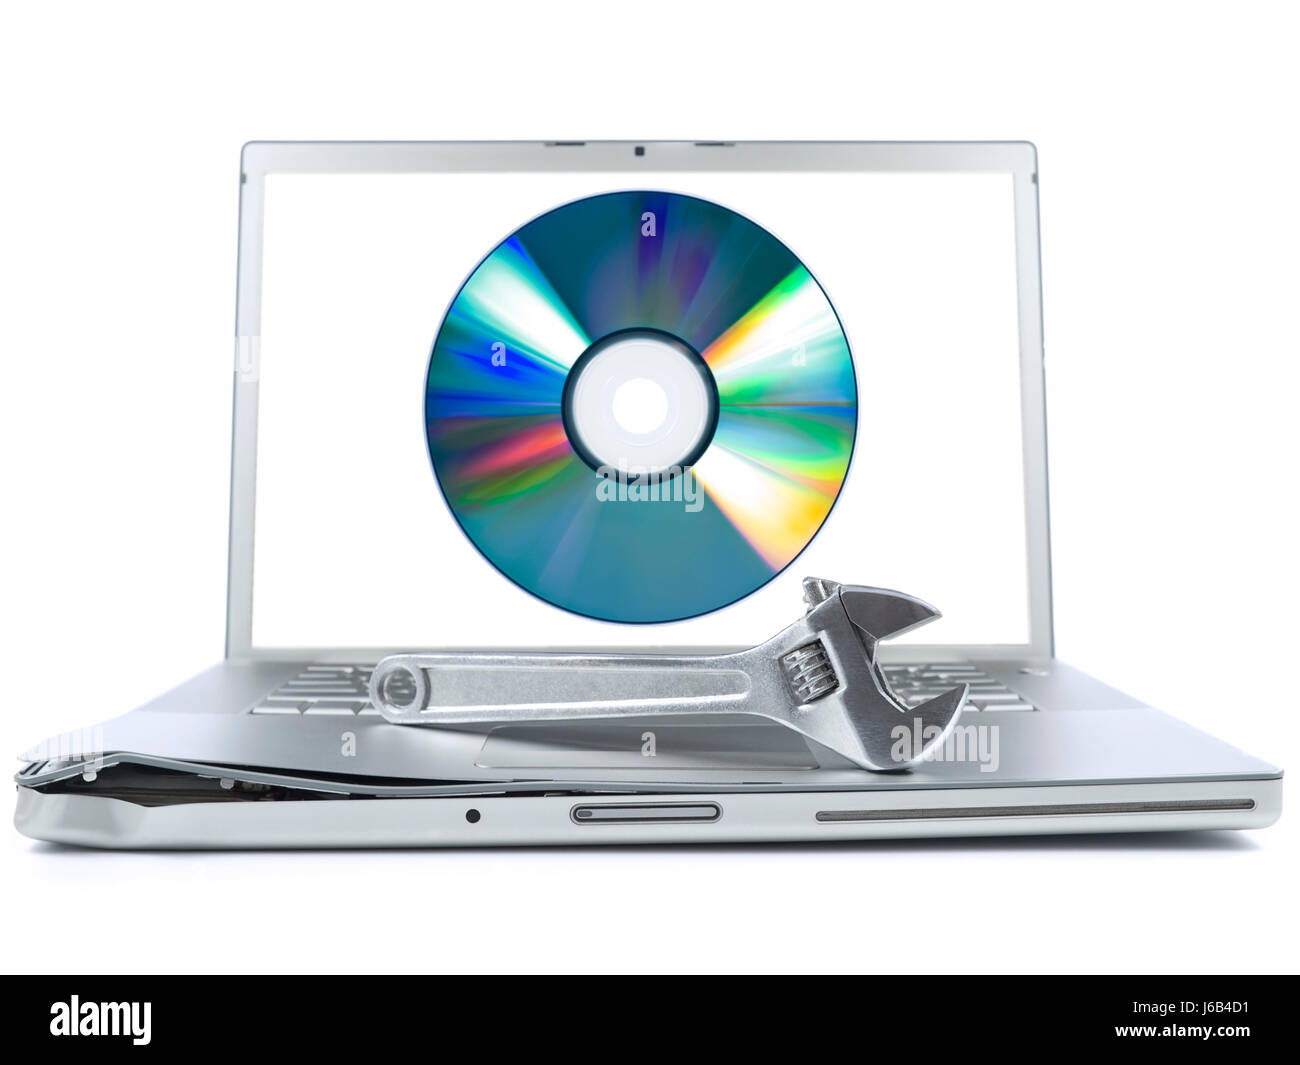 laptop notebook computers computer tool isolated broken CD wrench laptop Stock Photo